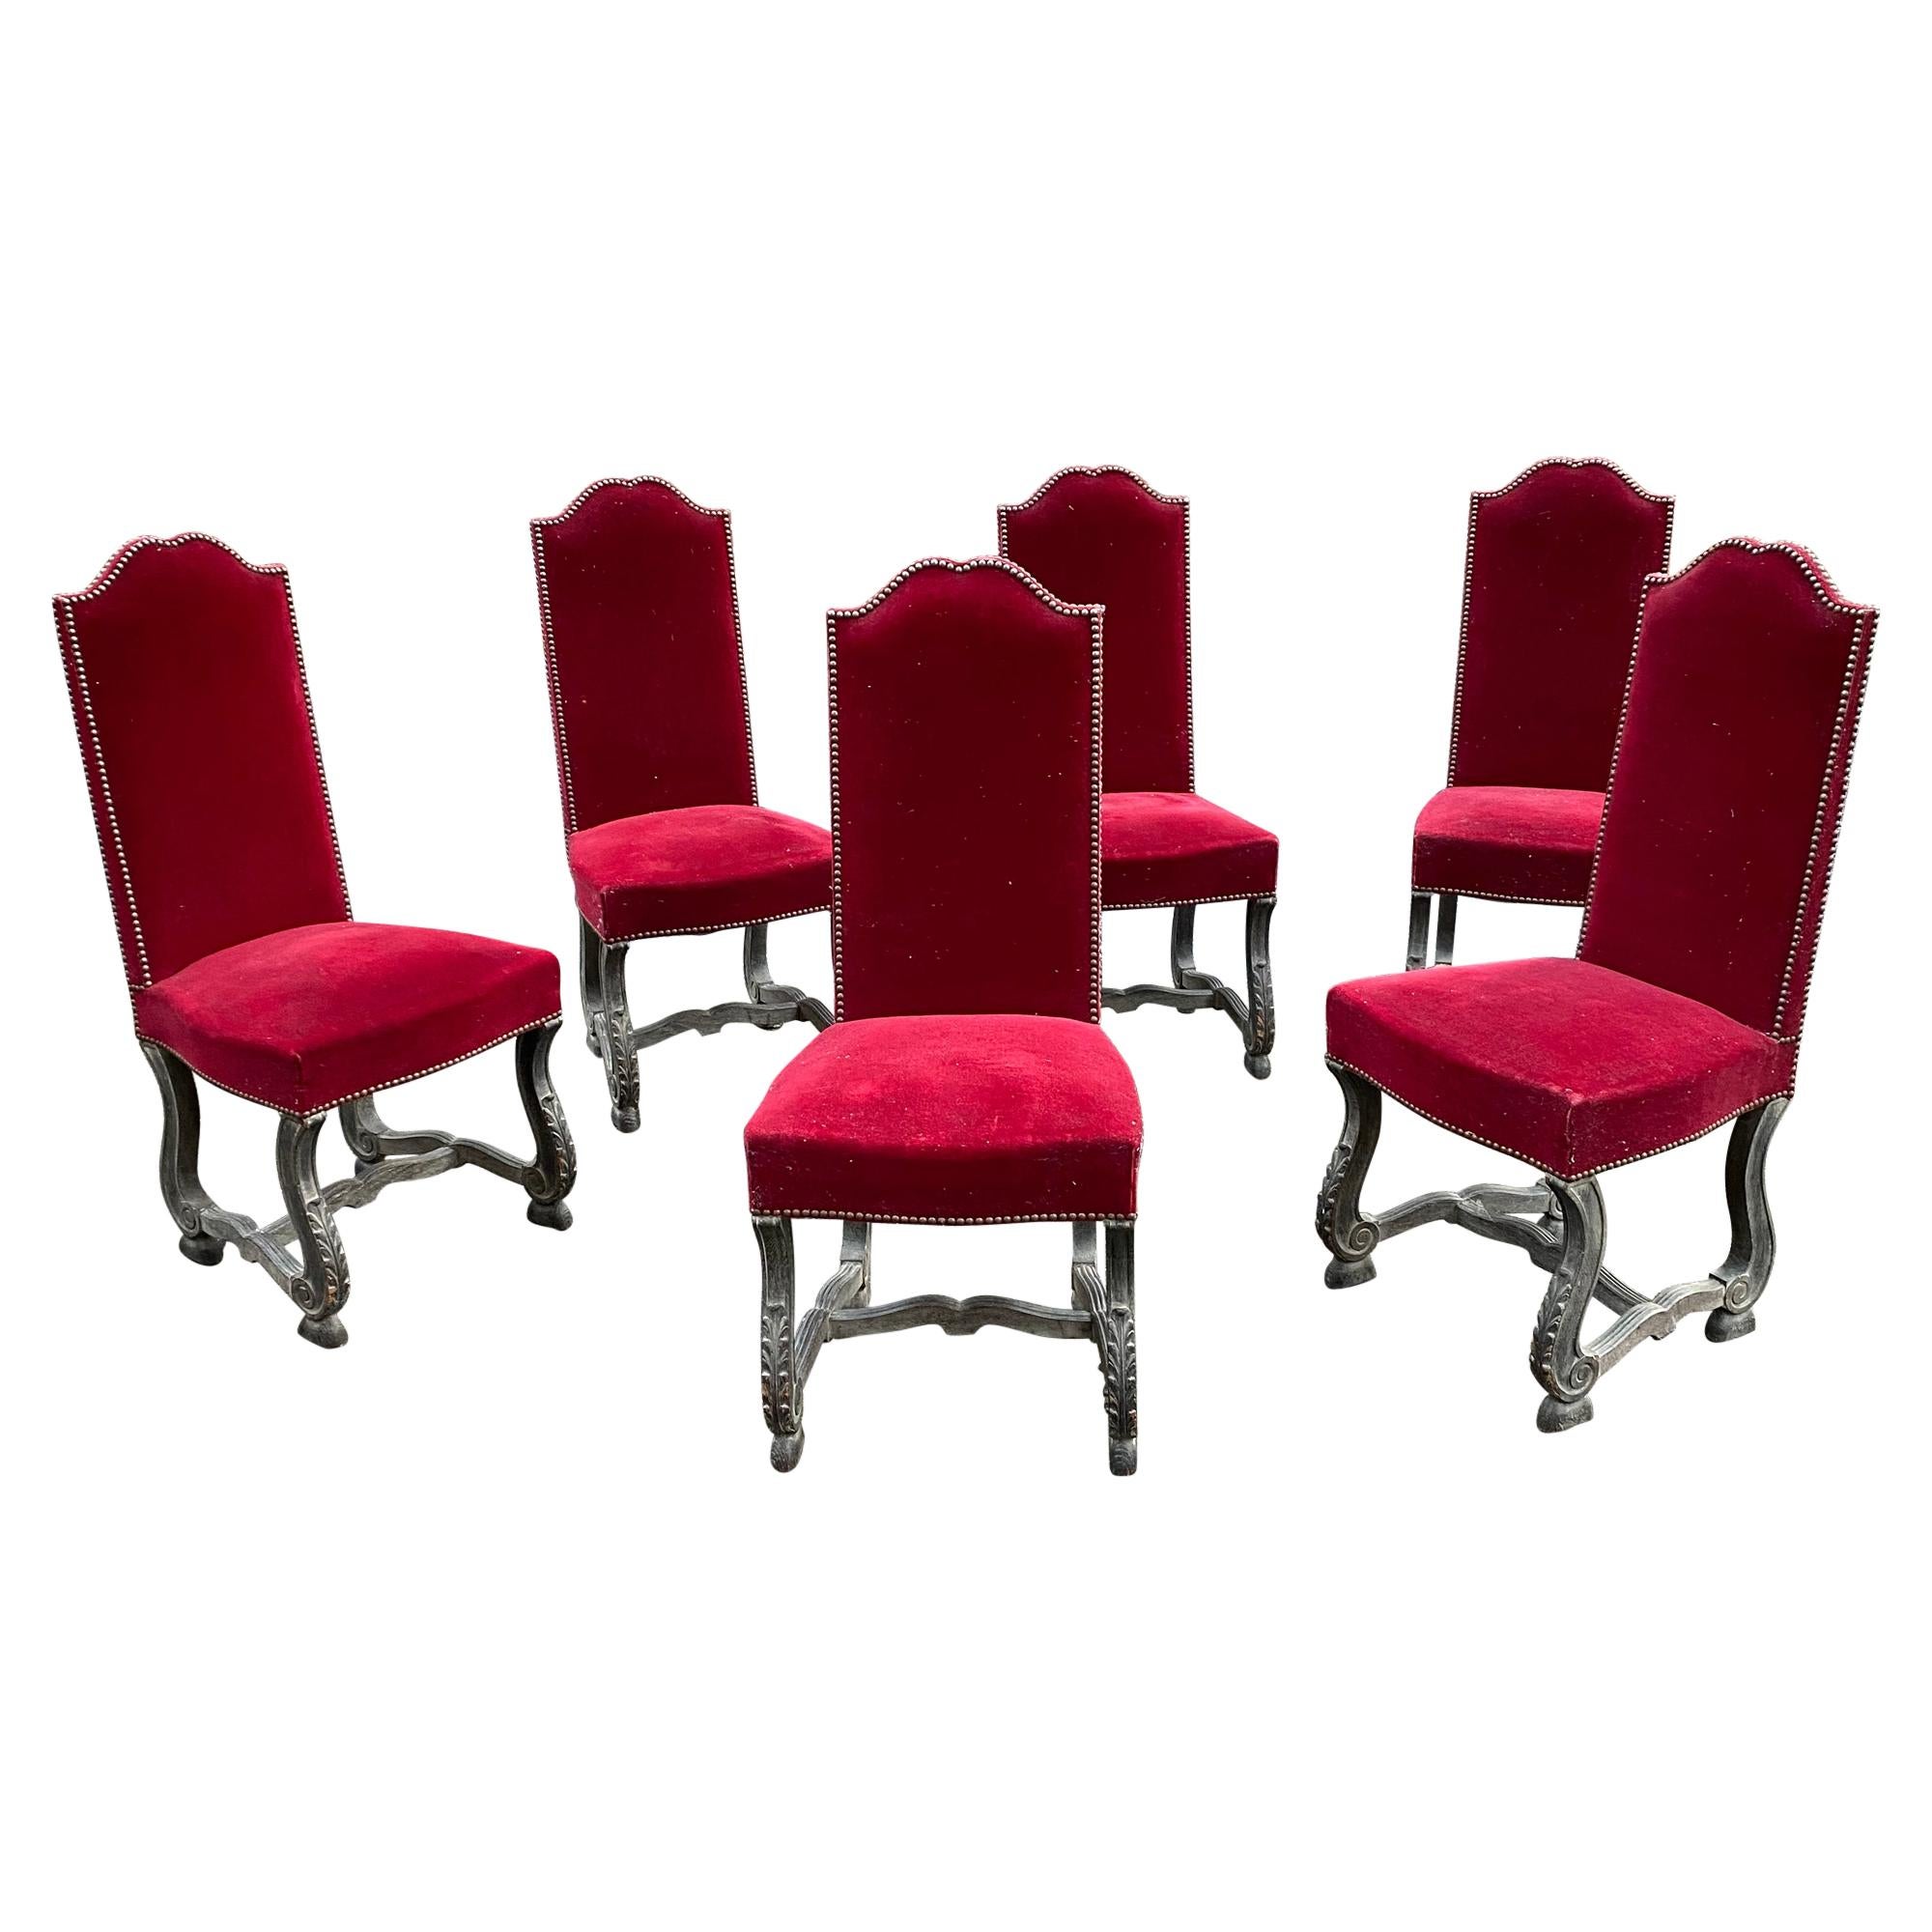 6 Neoclassic Chairs in Blackened and Ceruse Oak, circa 1940-1950 For Sale